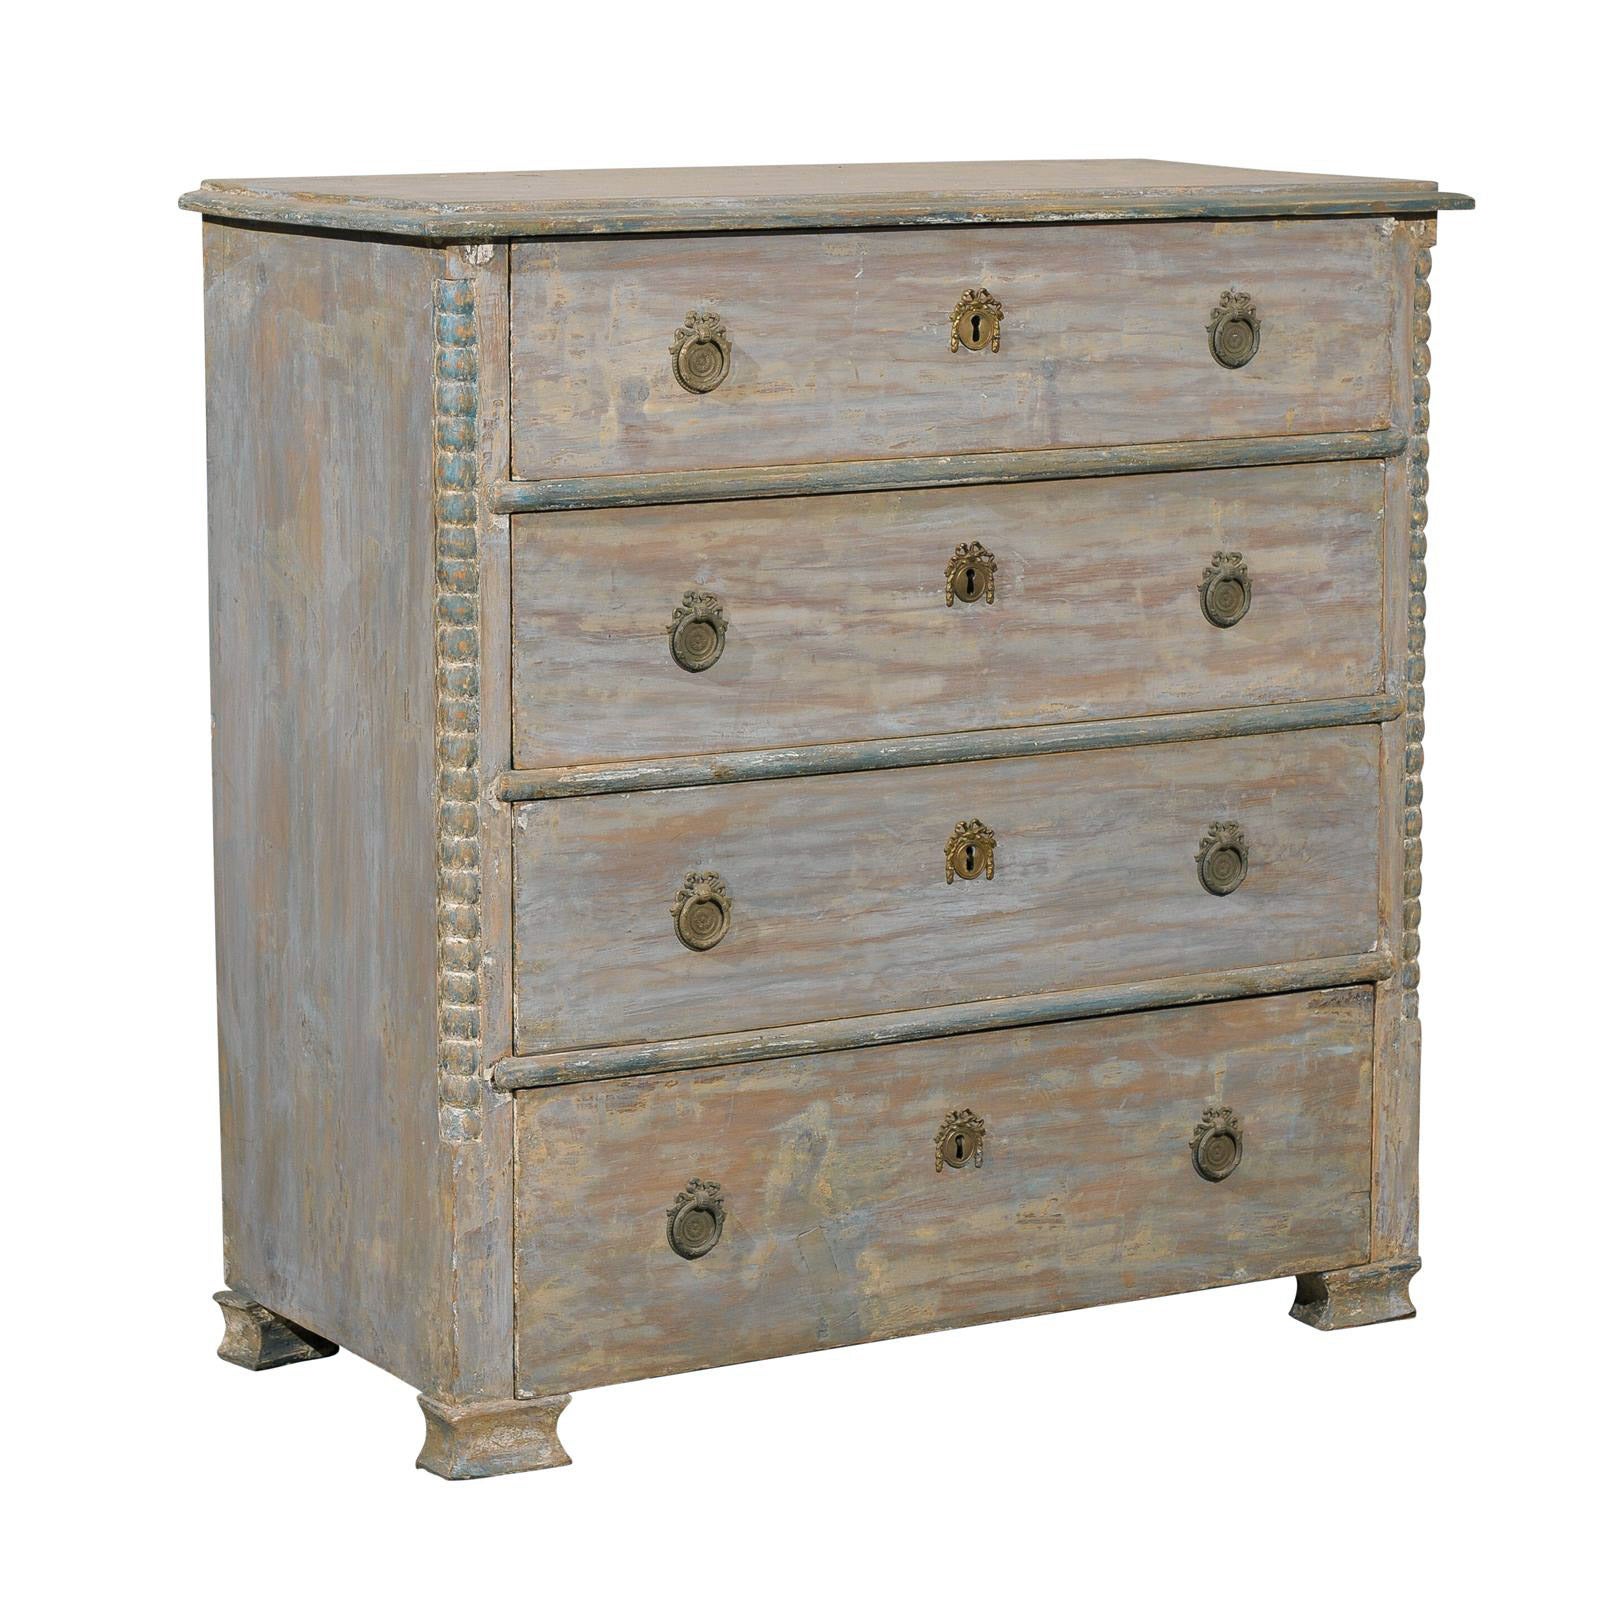 Swedish 19th Century Karl Johan Four-Drawer Painted Wood Chest with Carved Edges